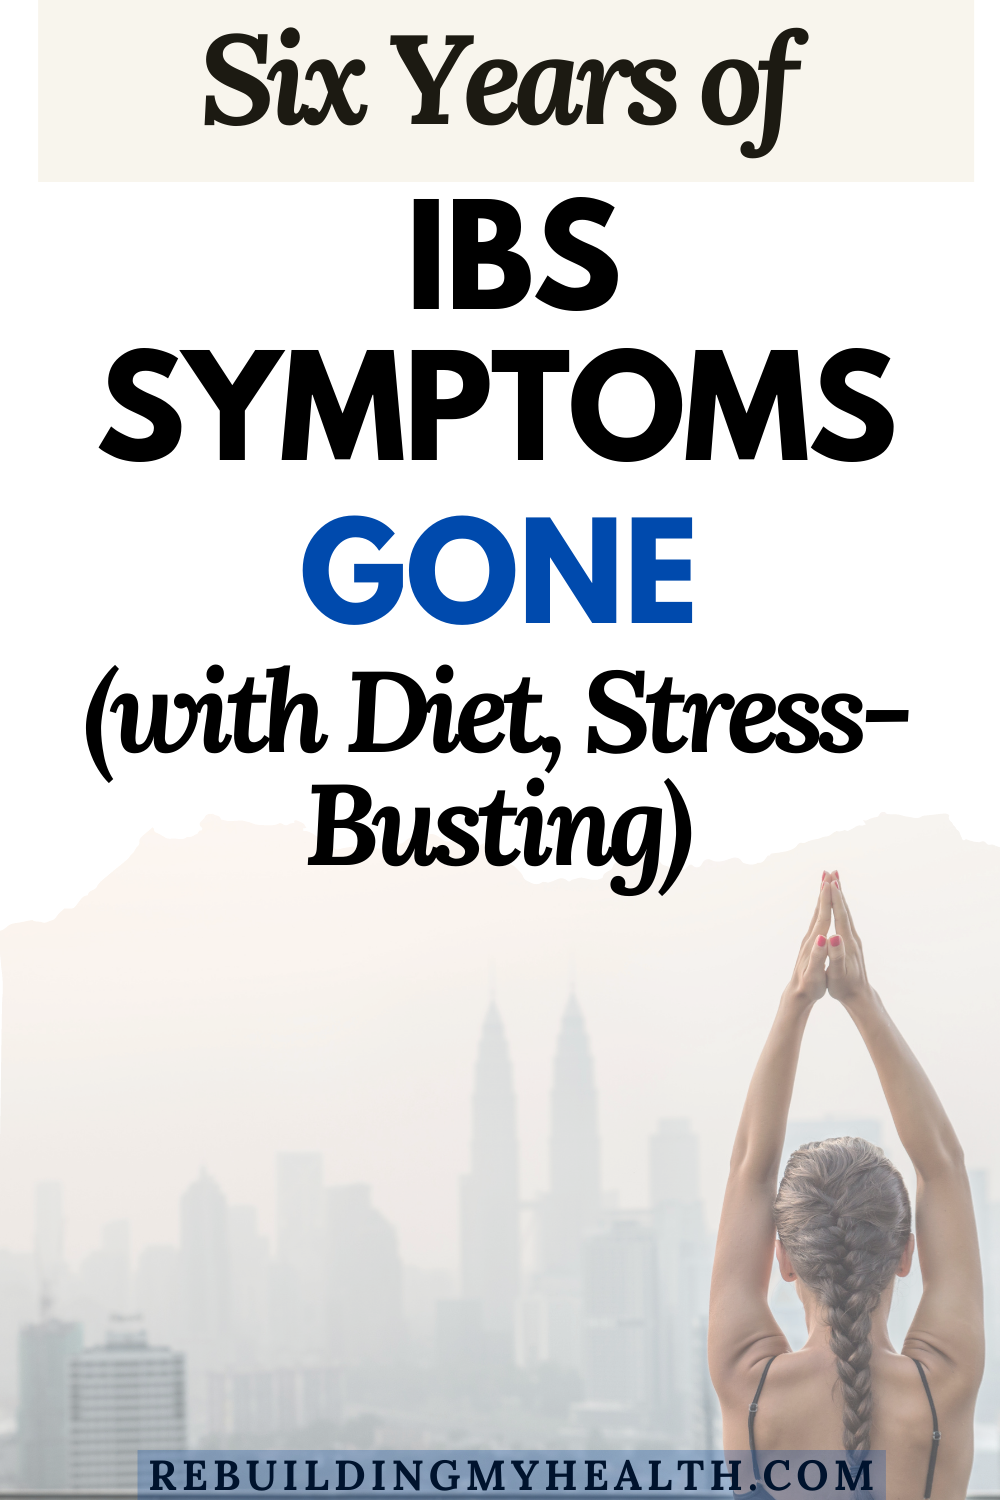 After six years of IBS symptoms, Angela found relief within a month with a paleo-style diet and lifestyle practices such as yoga nidra and Qigong